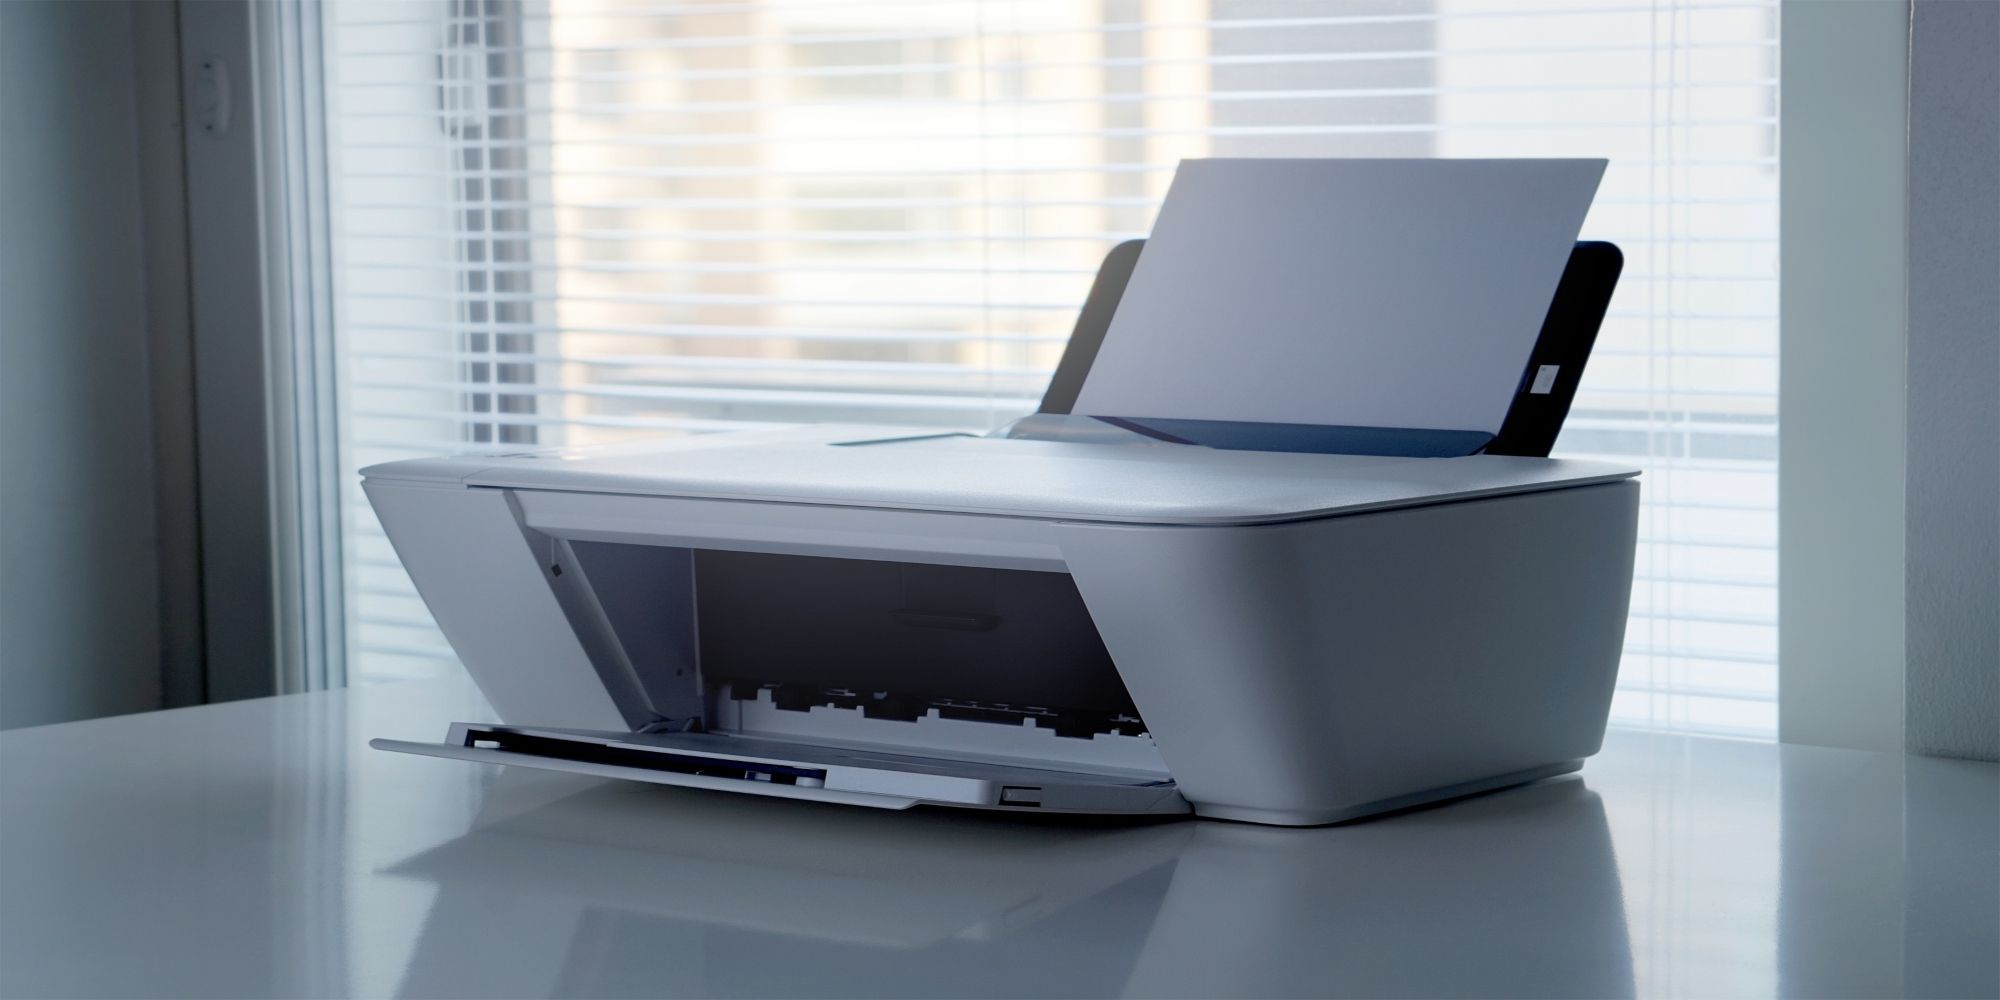 Best Home Printers (Updated 2020)